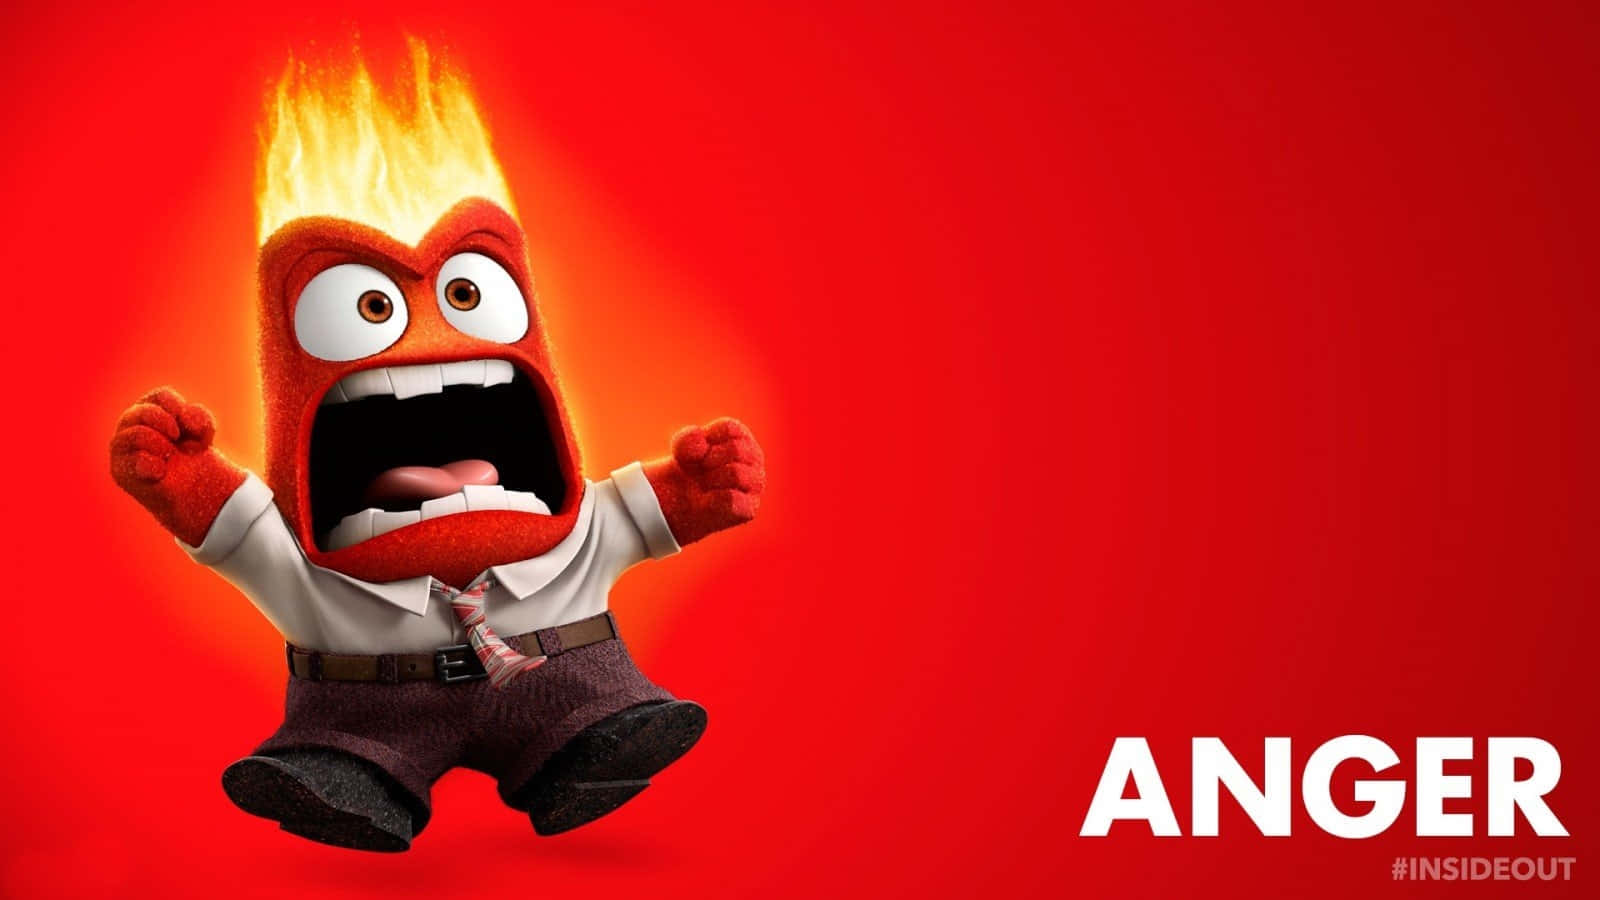 The faces of joy, sadness, and disbelief as seen in Disney Pixar's Inside Out